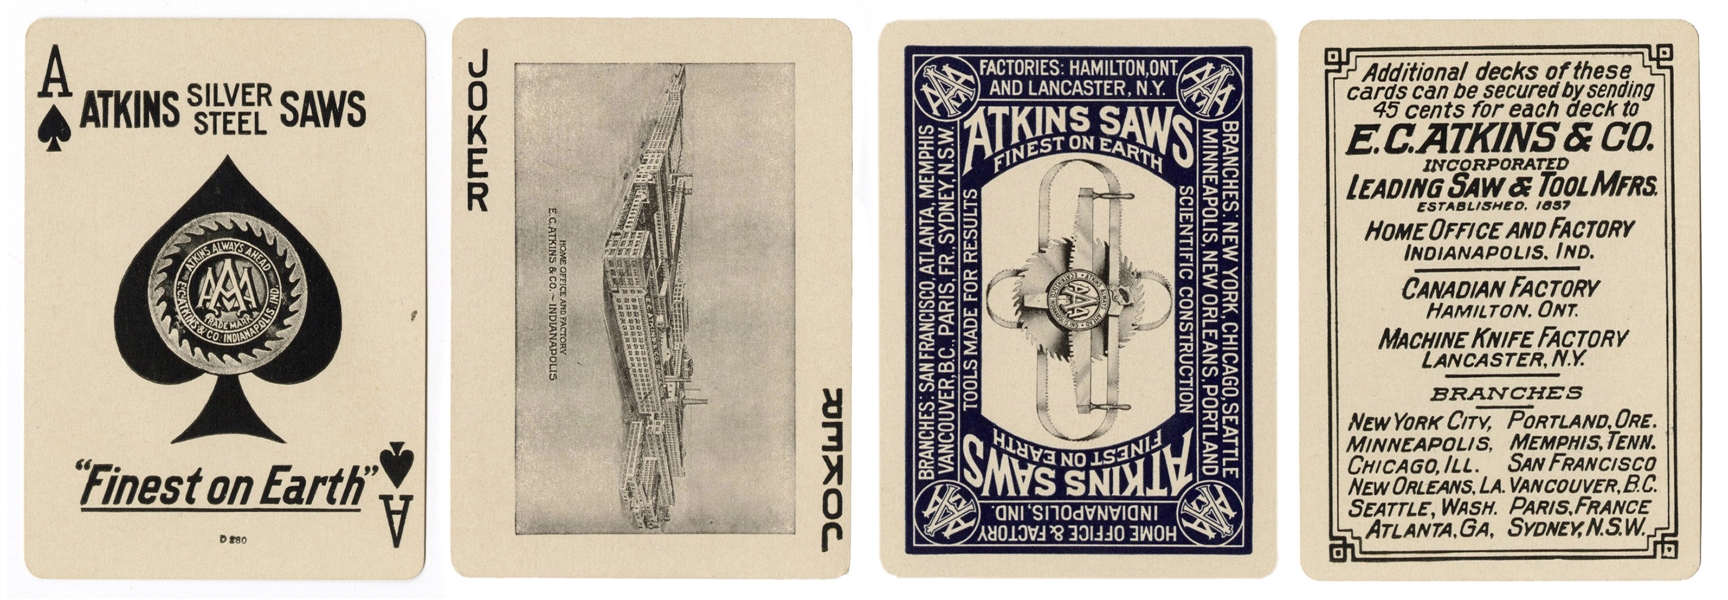  [Indianapolis] E.C. Atkins Saws Advertising Playing Cards. ...